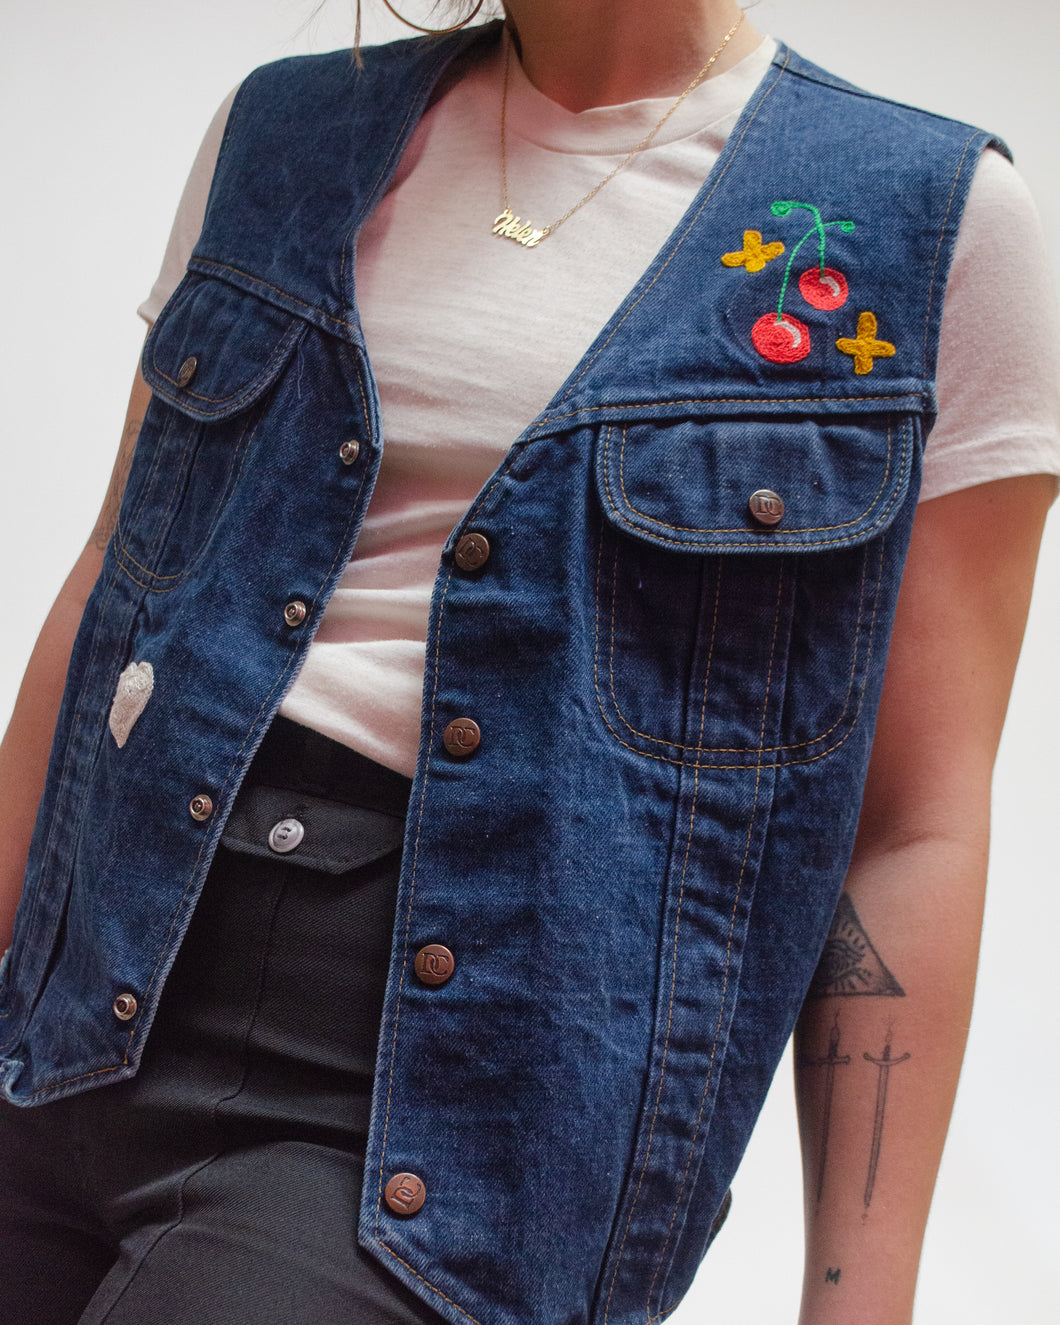 Denim workwear vest with sweet embroidery